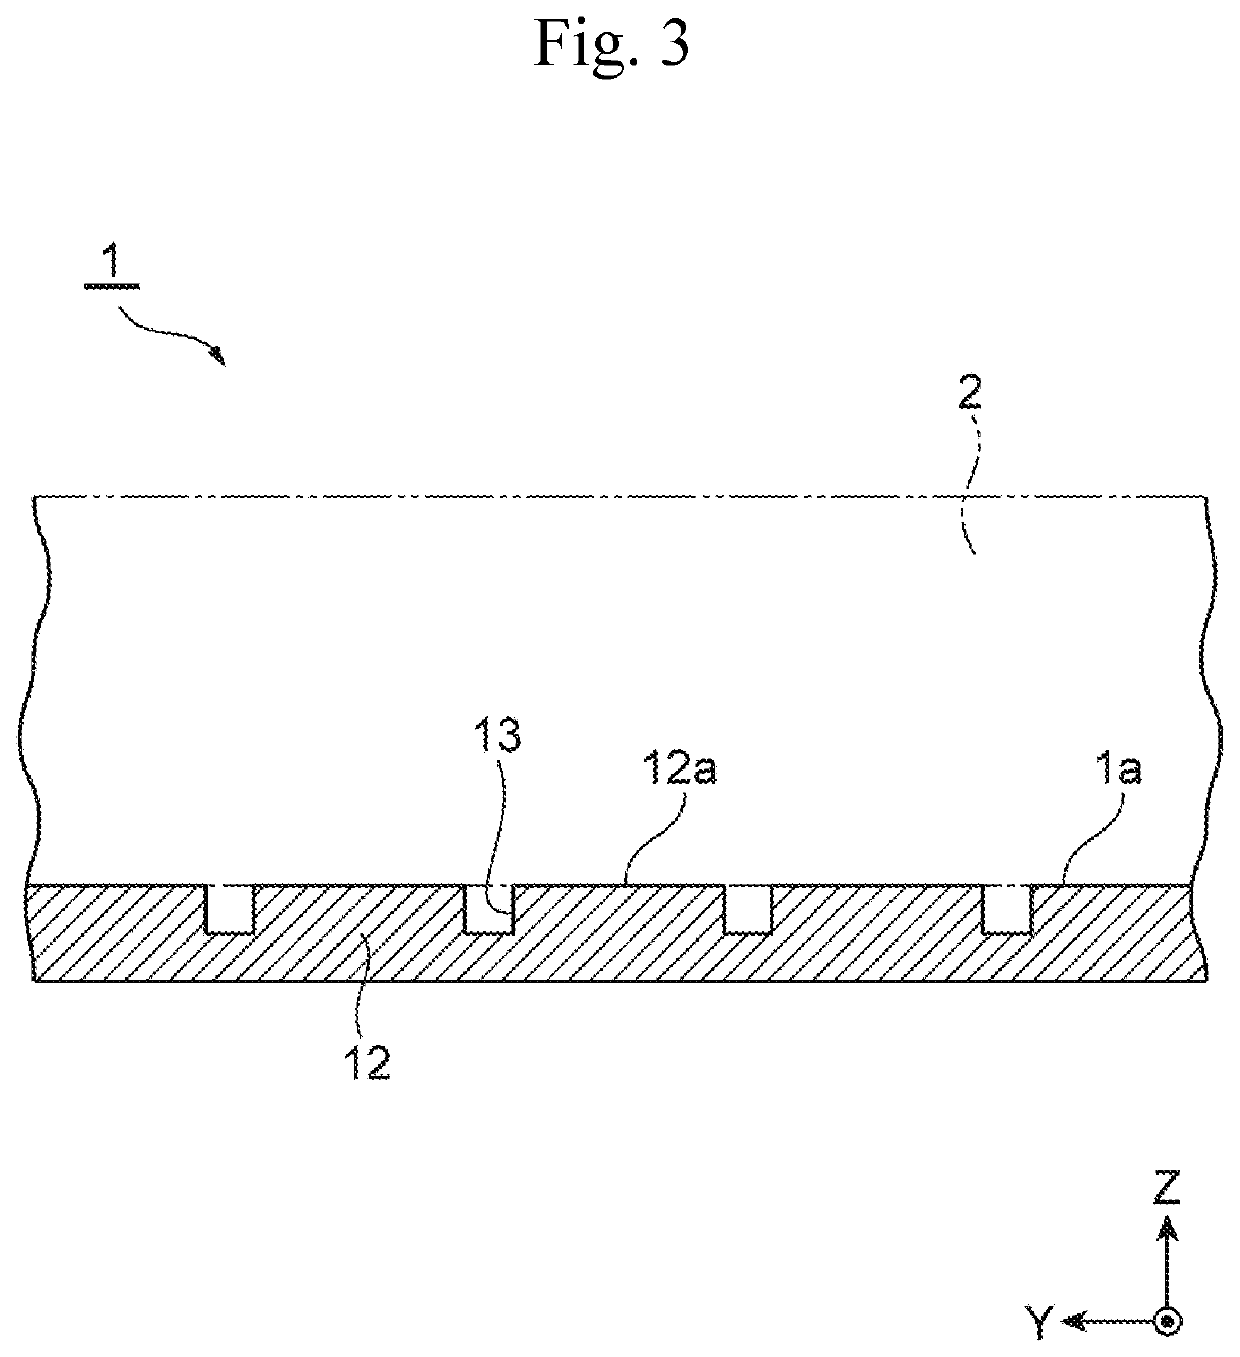 Fuel cell separator, method for producing the same, and apparatus for producing the same